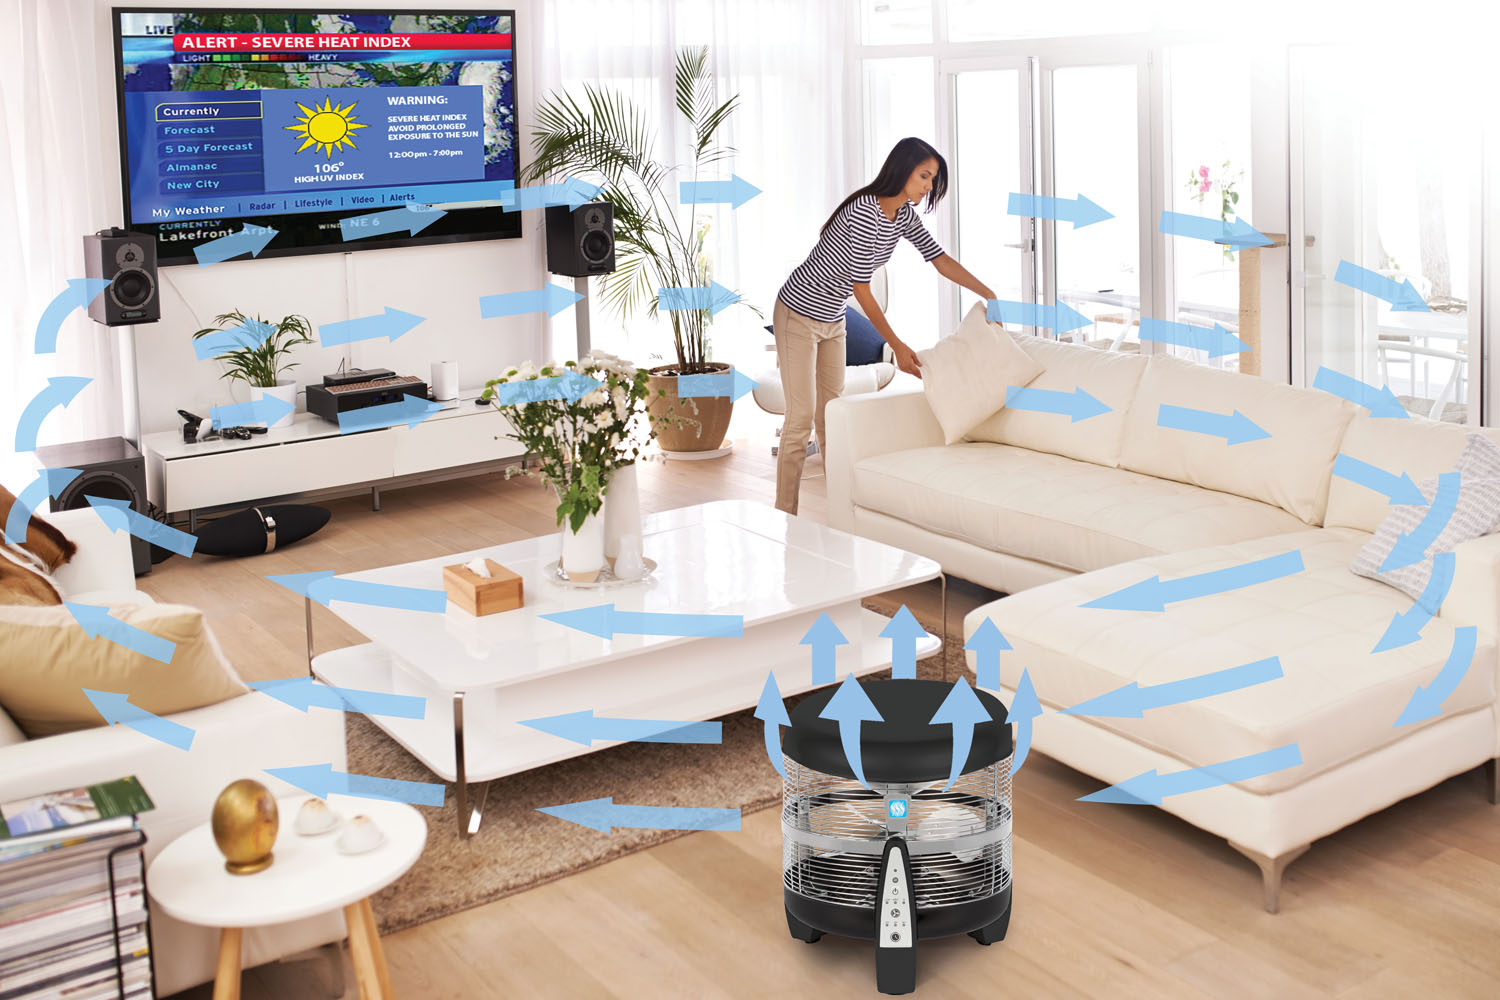 Power360™️ in a Living Room with a woman, Arrows showing airflow